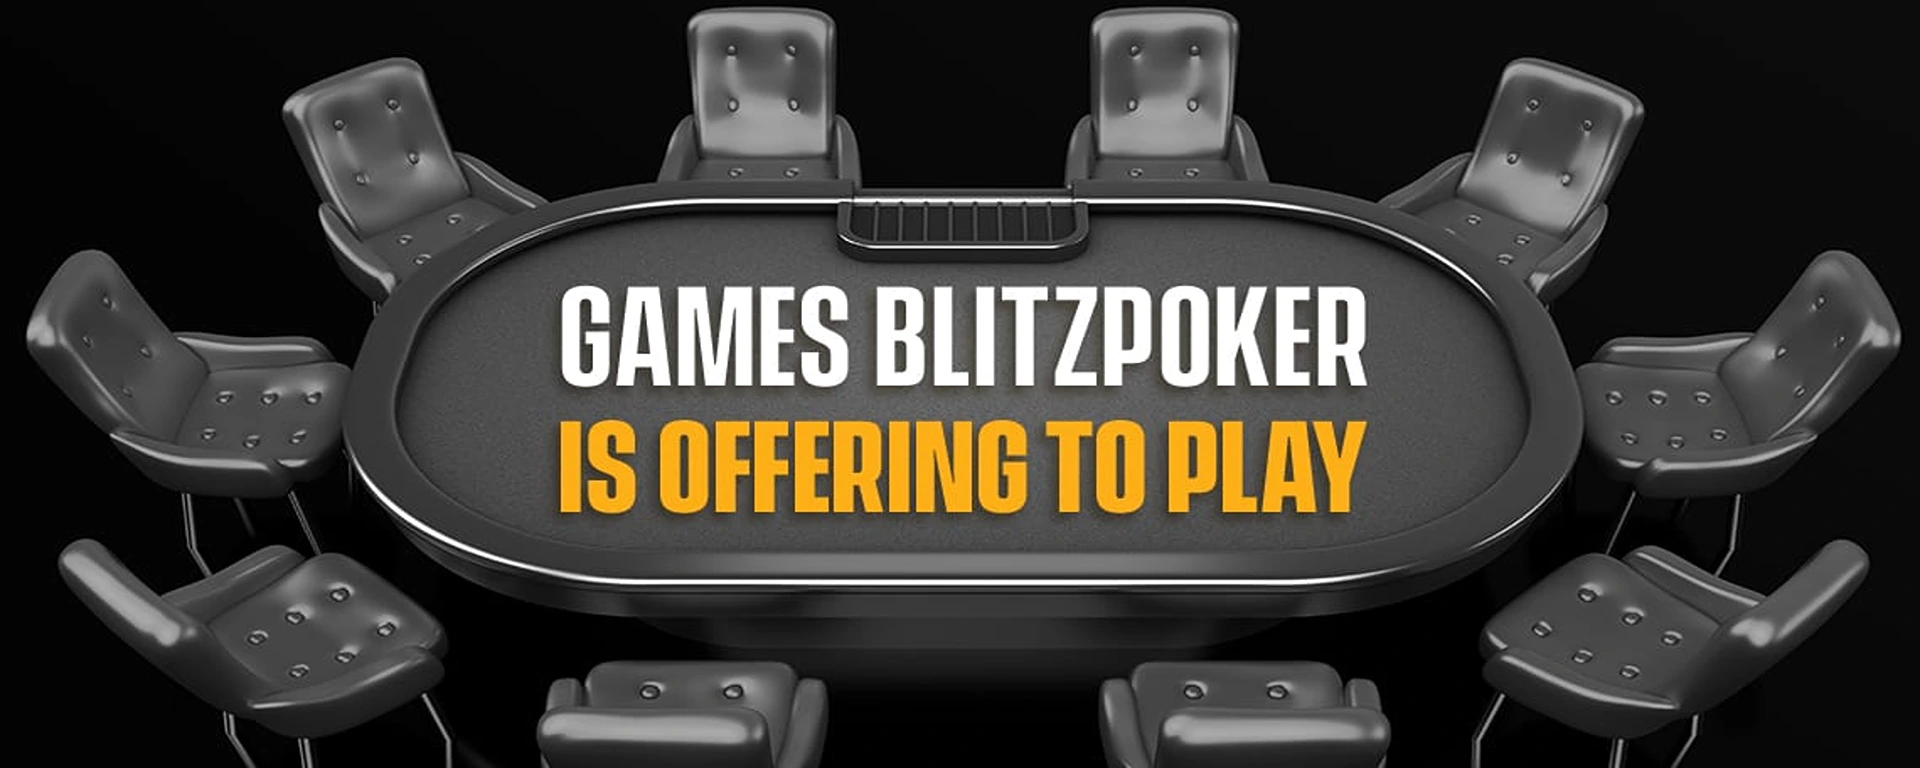 What Kind of Games BLITZPOKER is Offering to Play ?